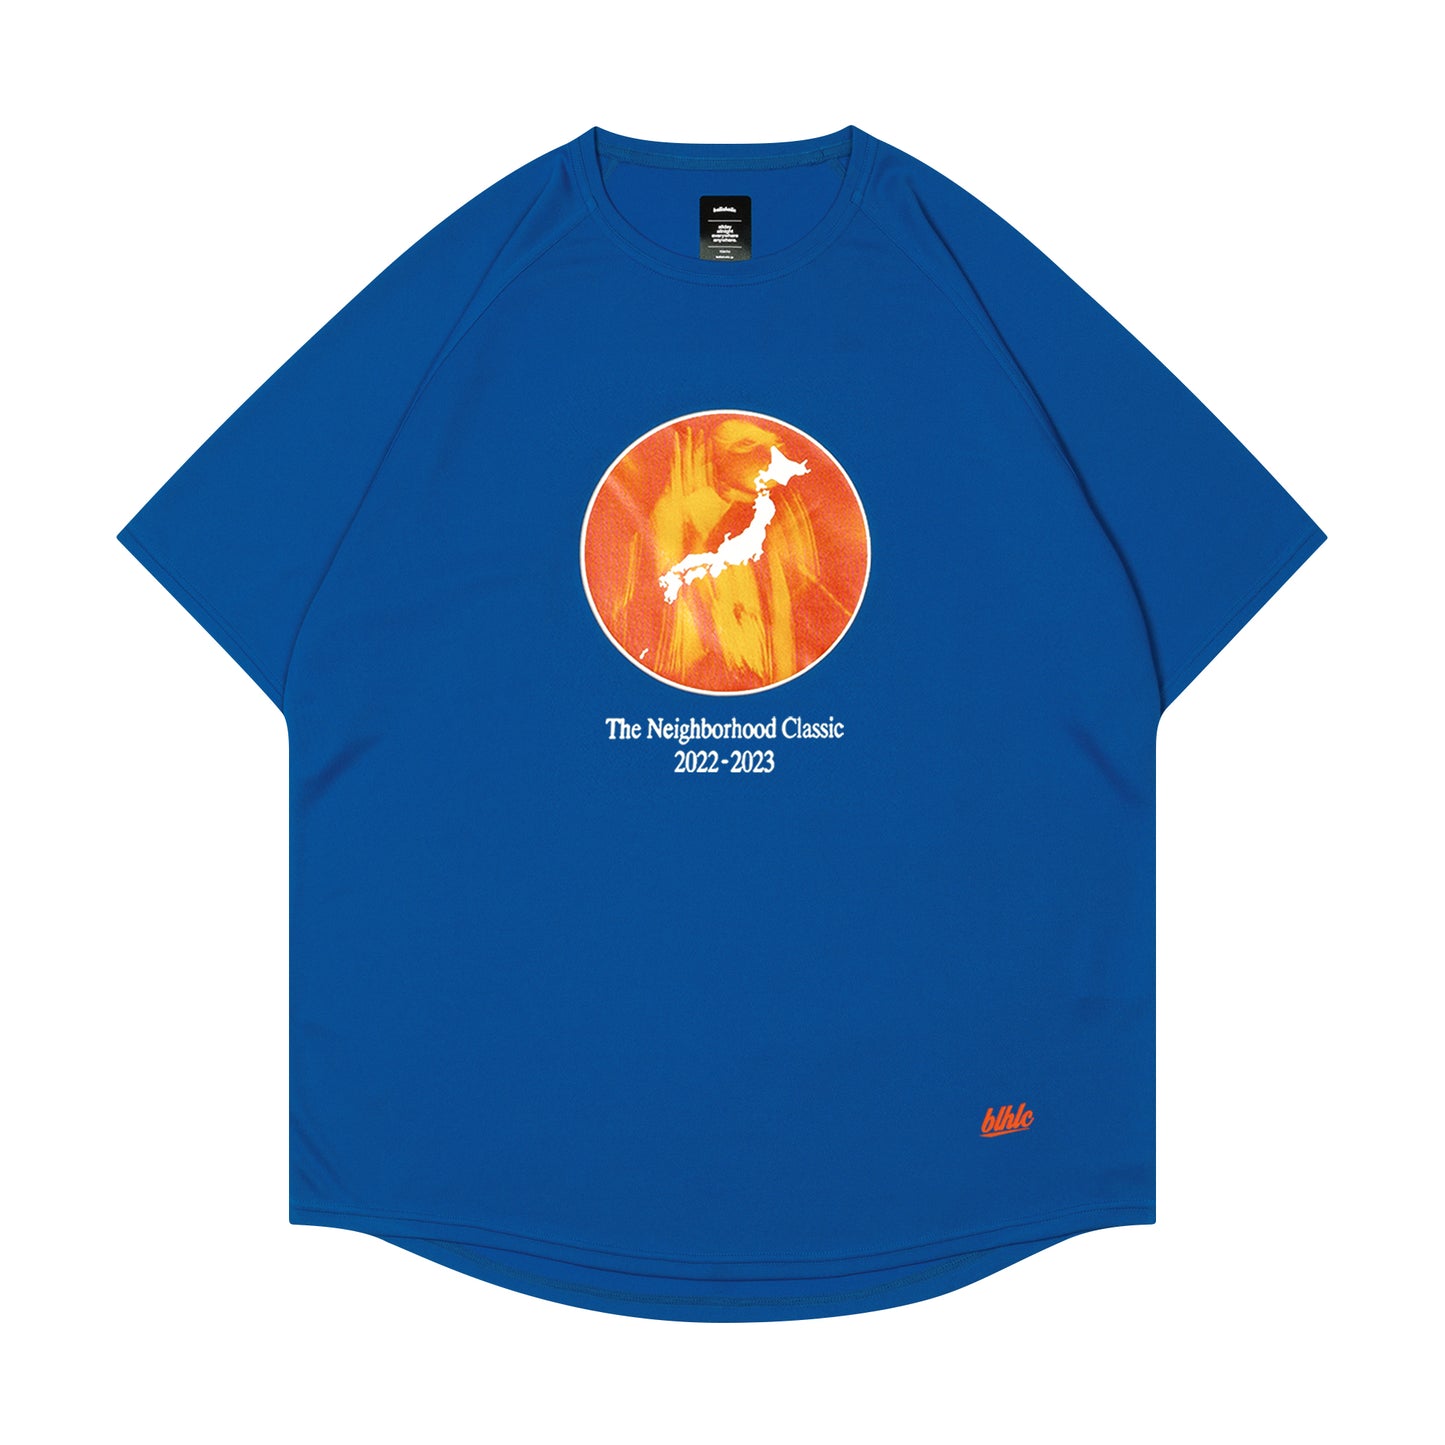 The Final Cool Tee (blue)